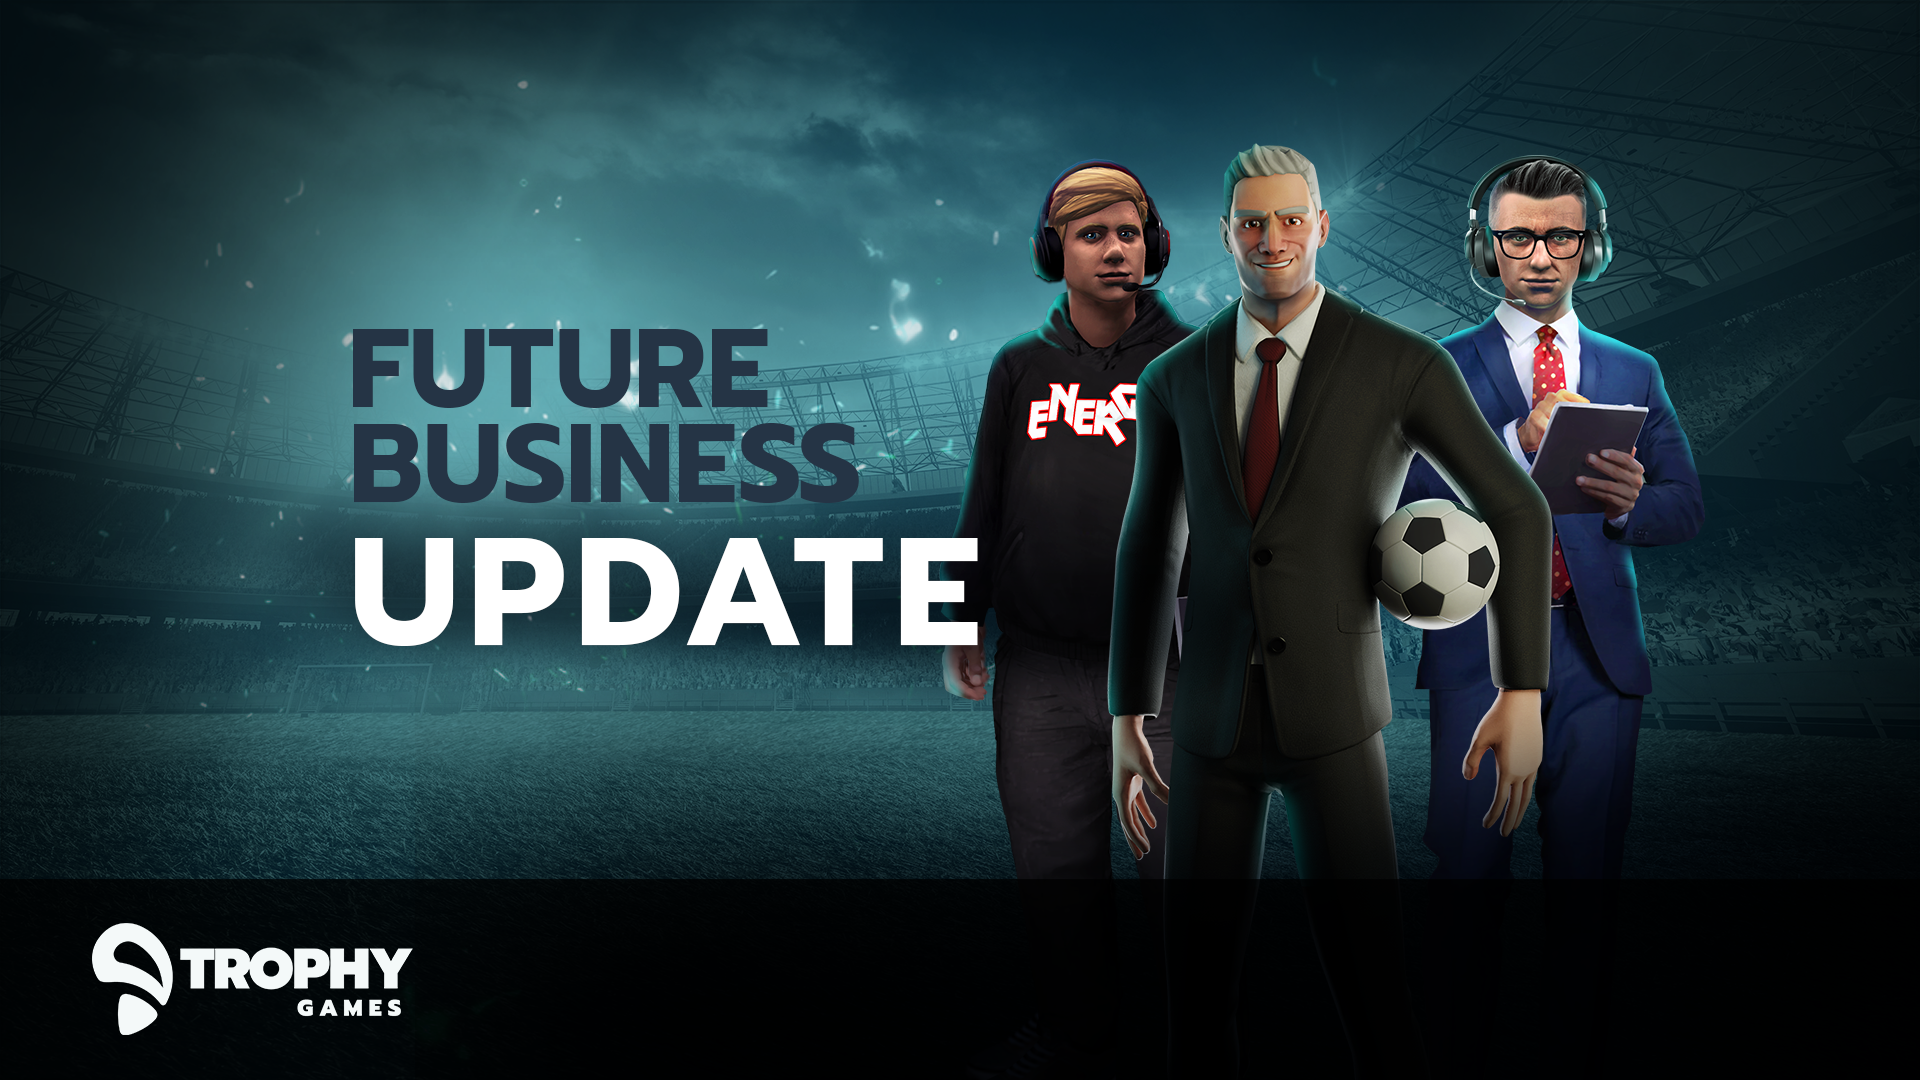 Trophy Games - future business update